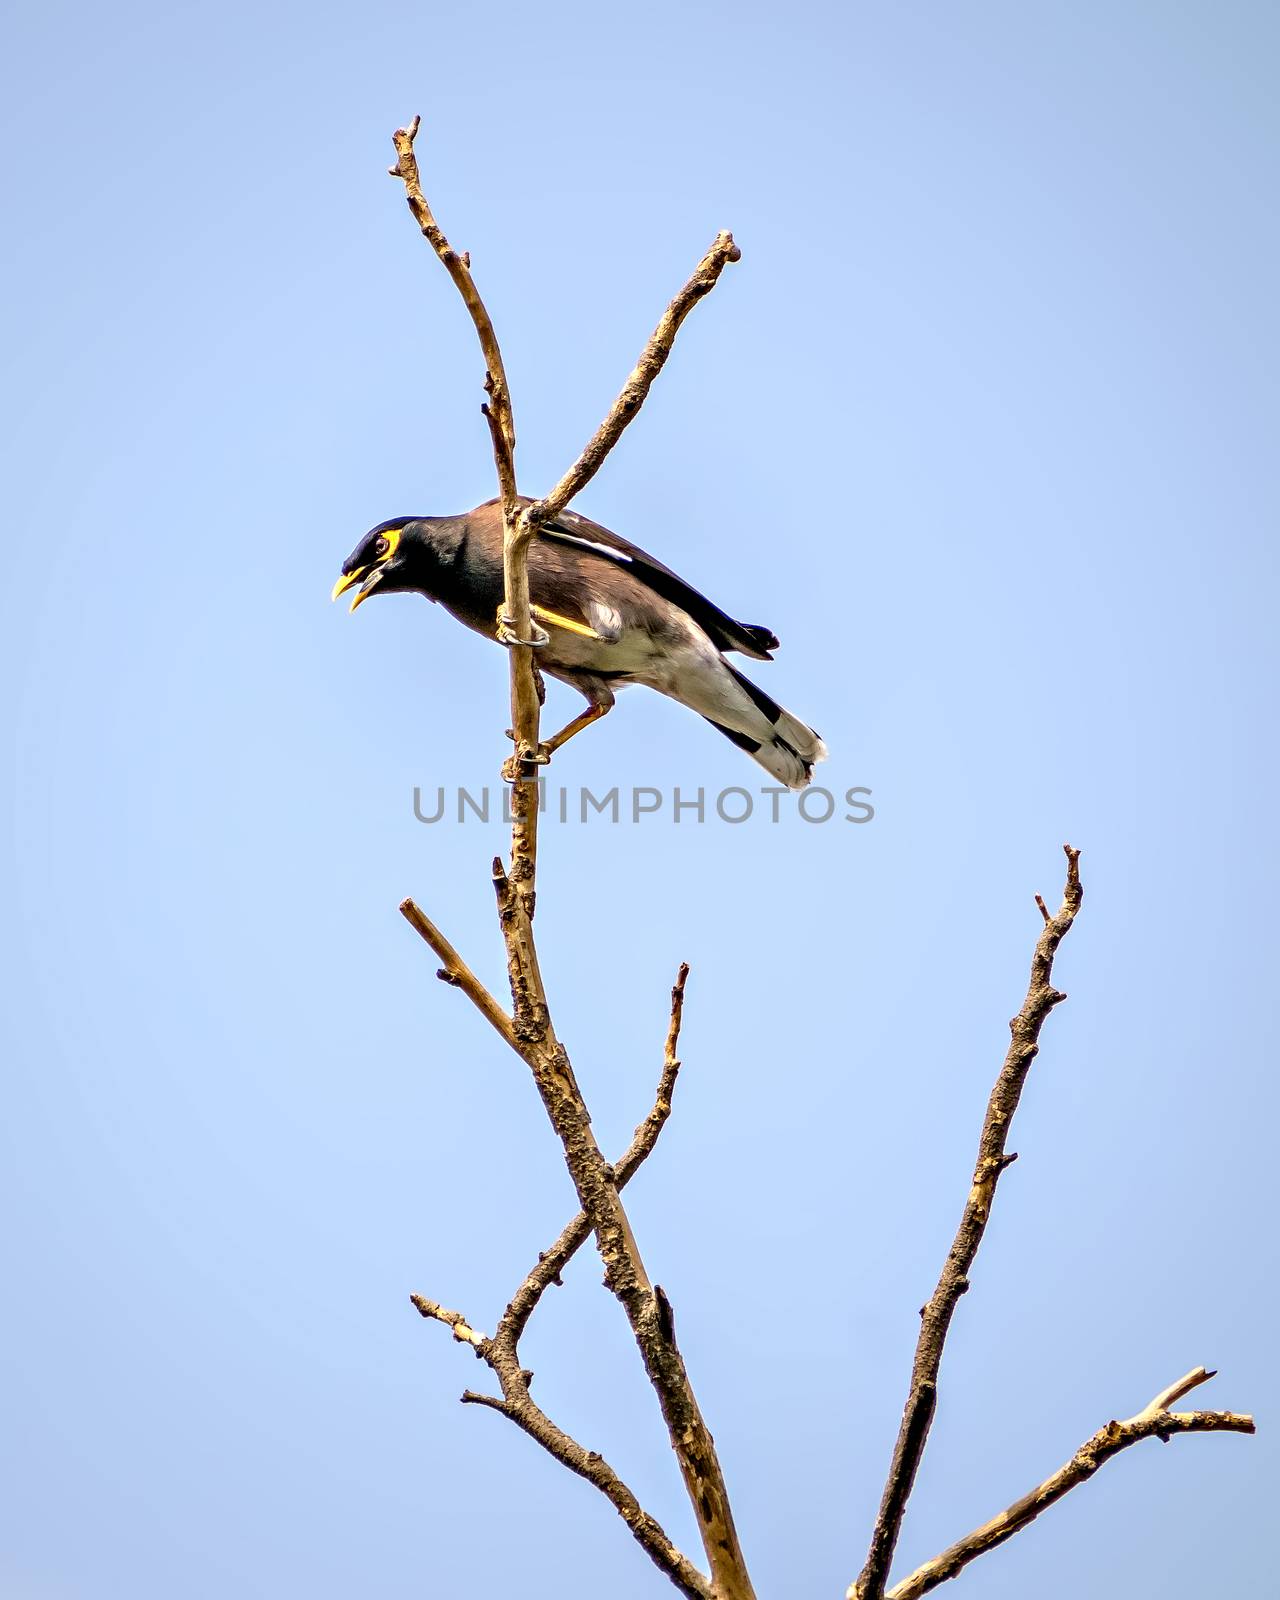 Common Myna bird sitting & shouting on dry tree branch with blue sky background. by lalam